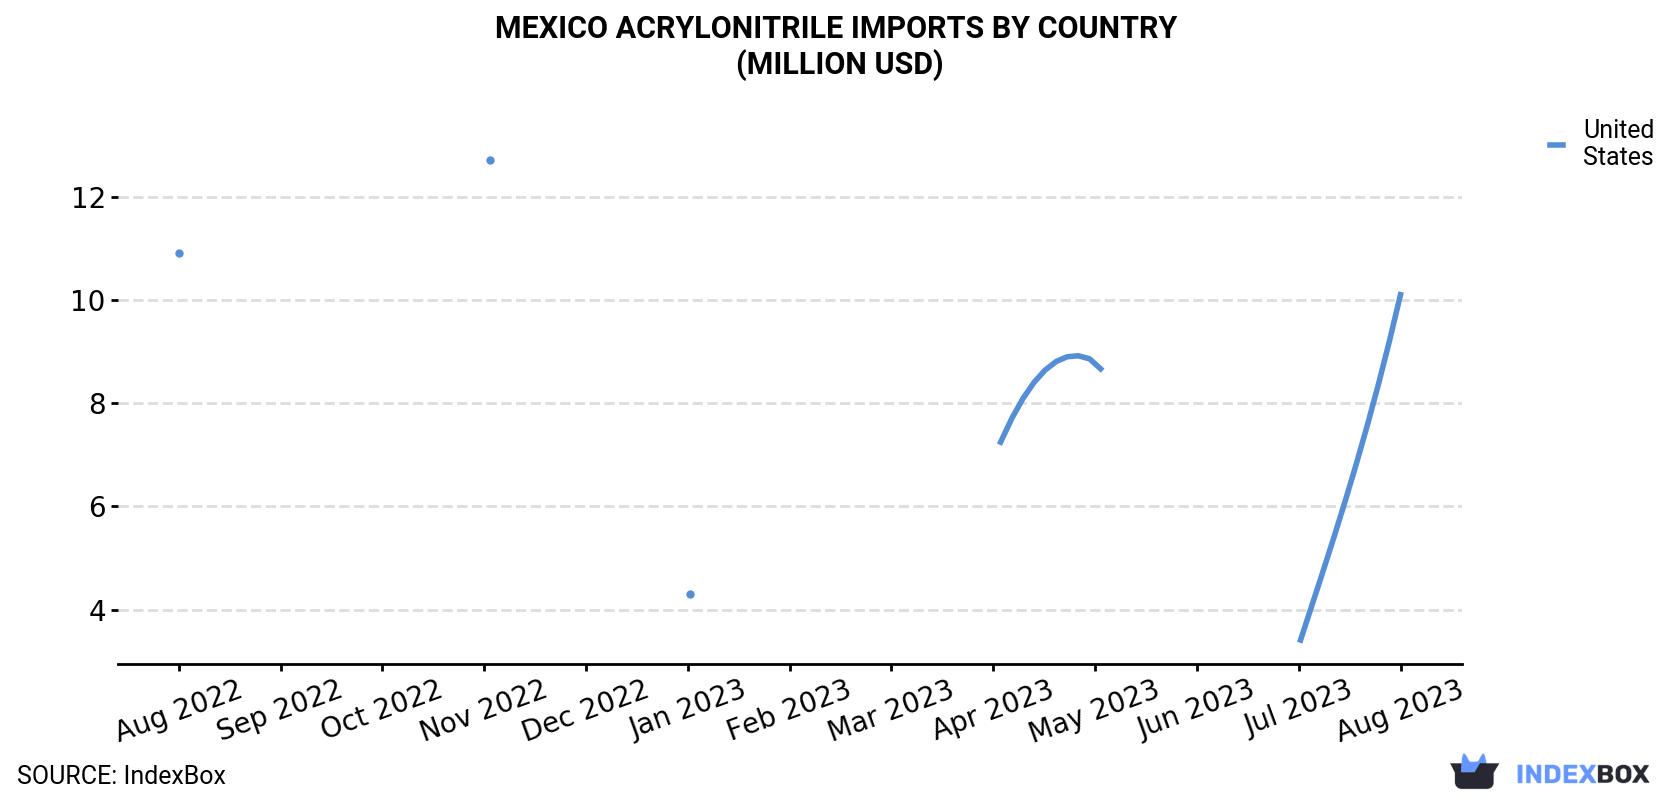 Mexico Acrylonitrile Imports By Country (Million USD)